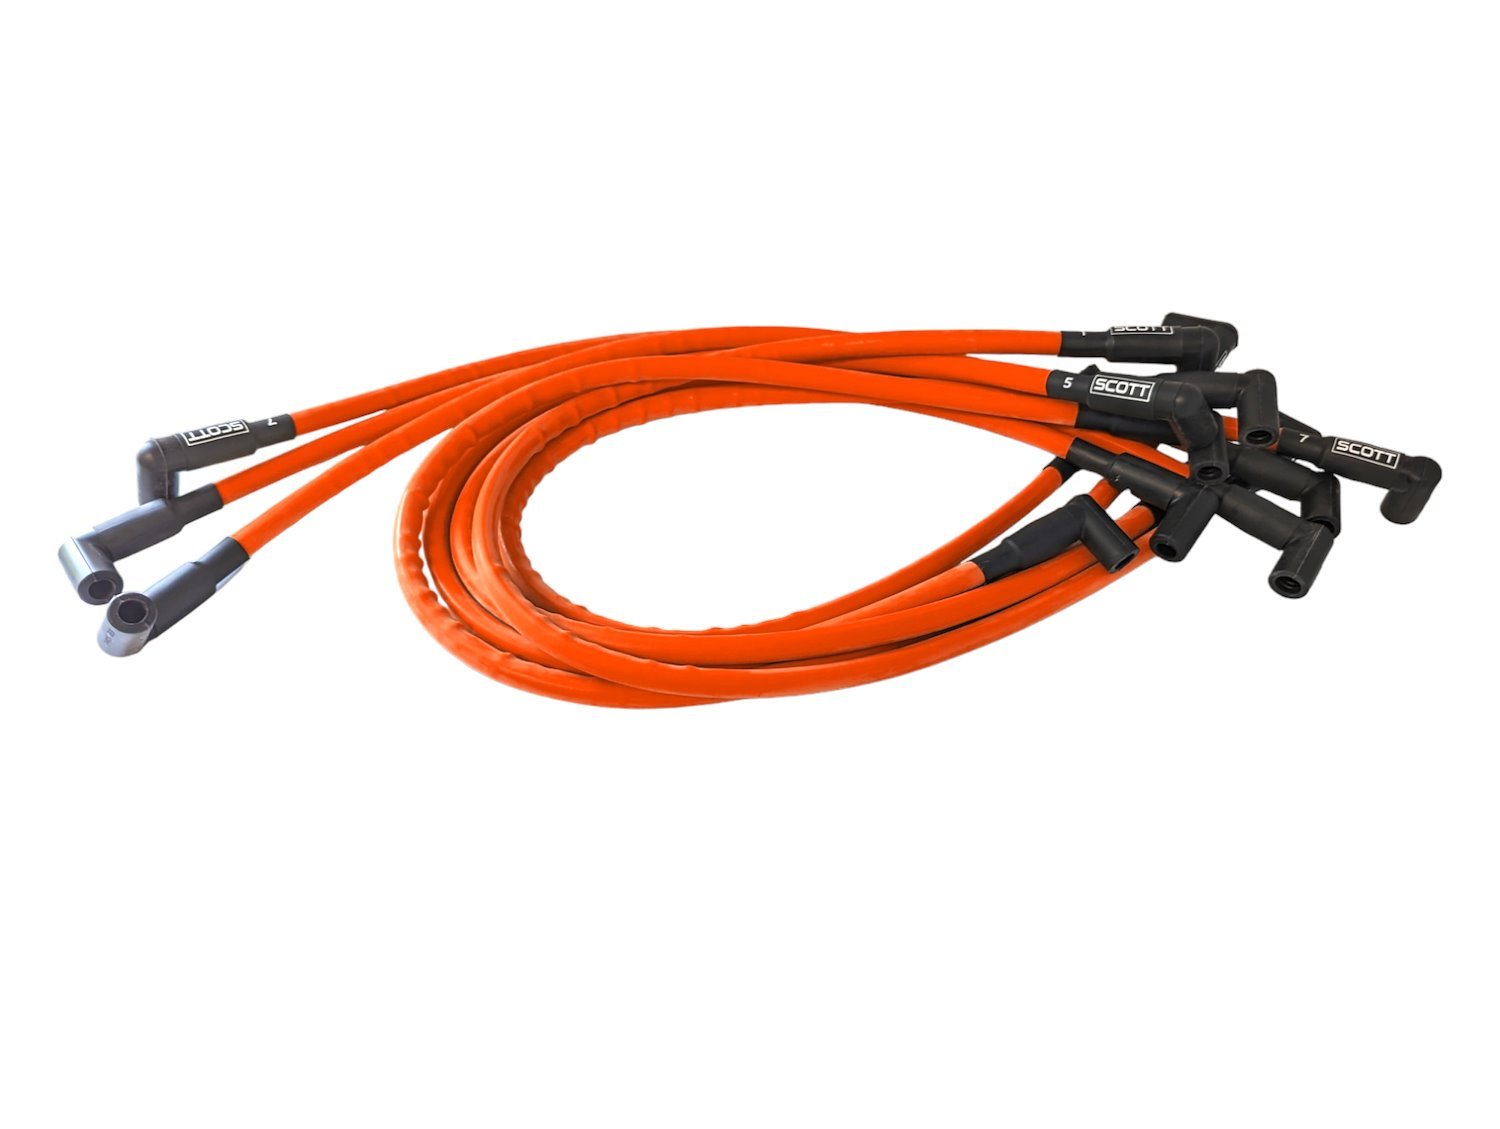 SPW-CH-430-9 High-Performance Silicone-Sleeved Spark Plug Wire Set for Big Block Ford, Under Header [Fluorescent Orange]